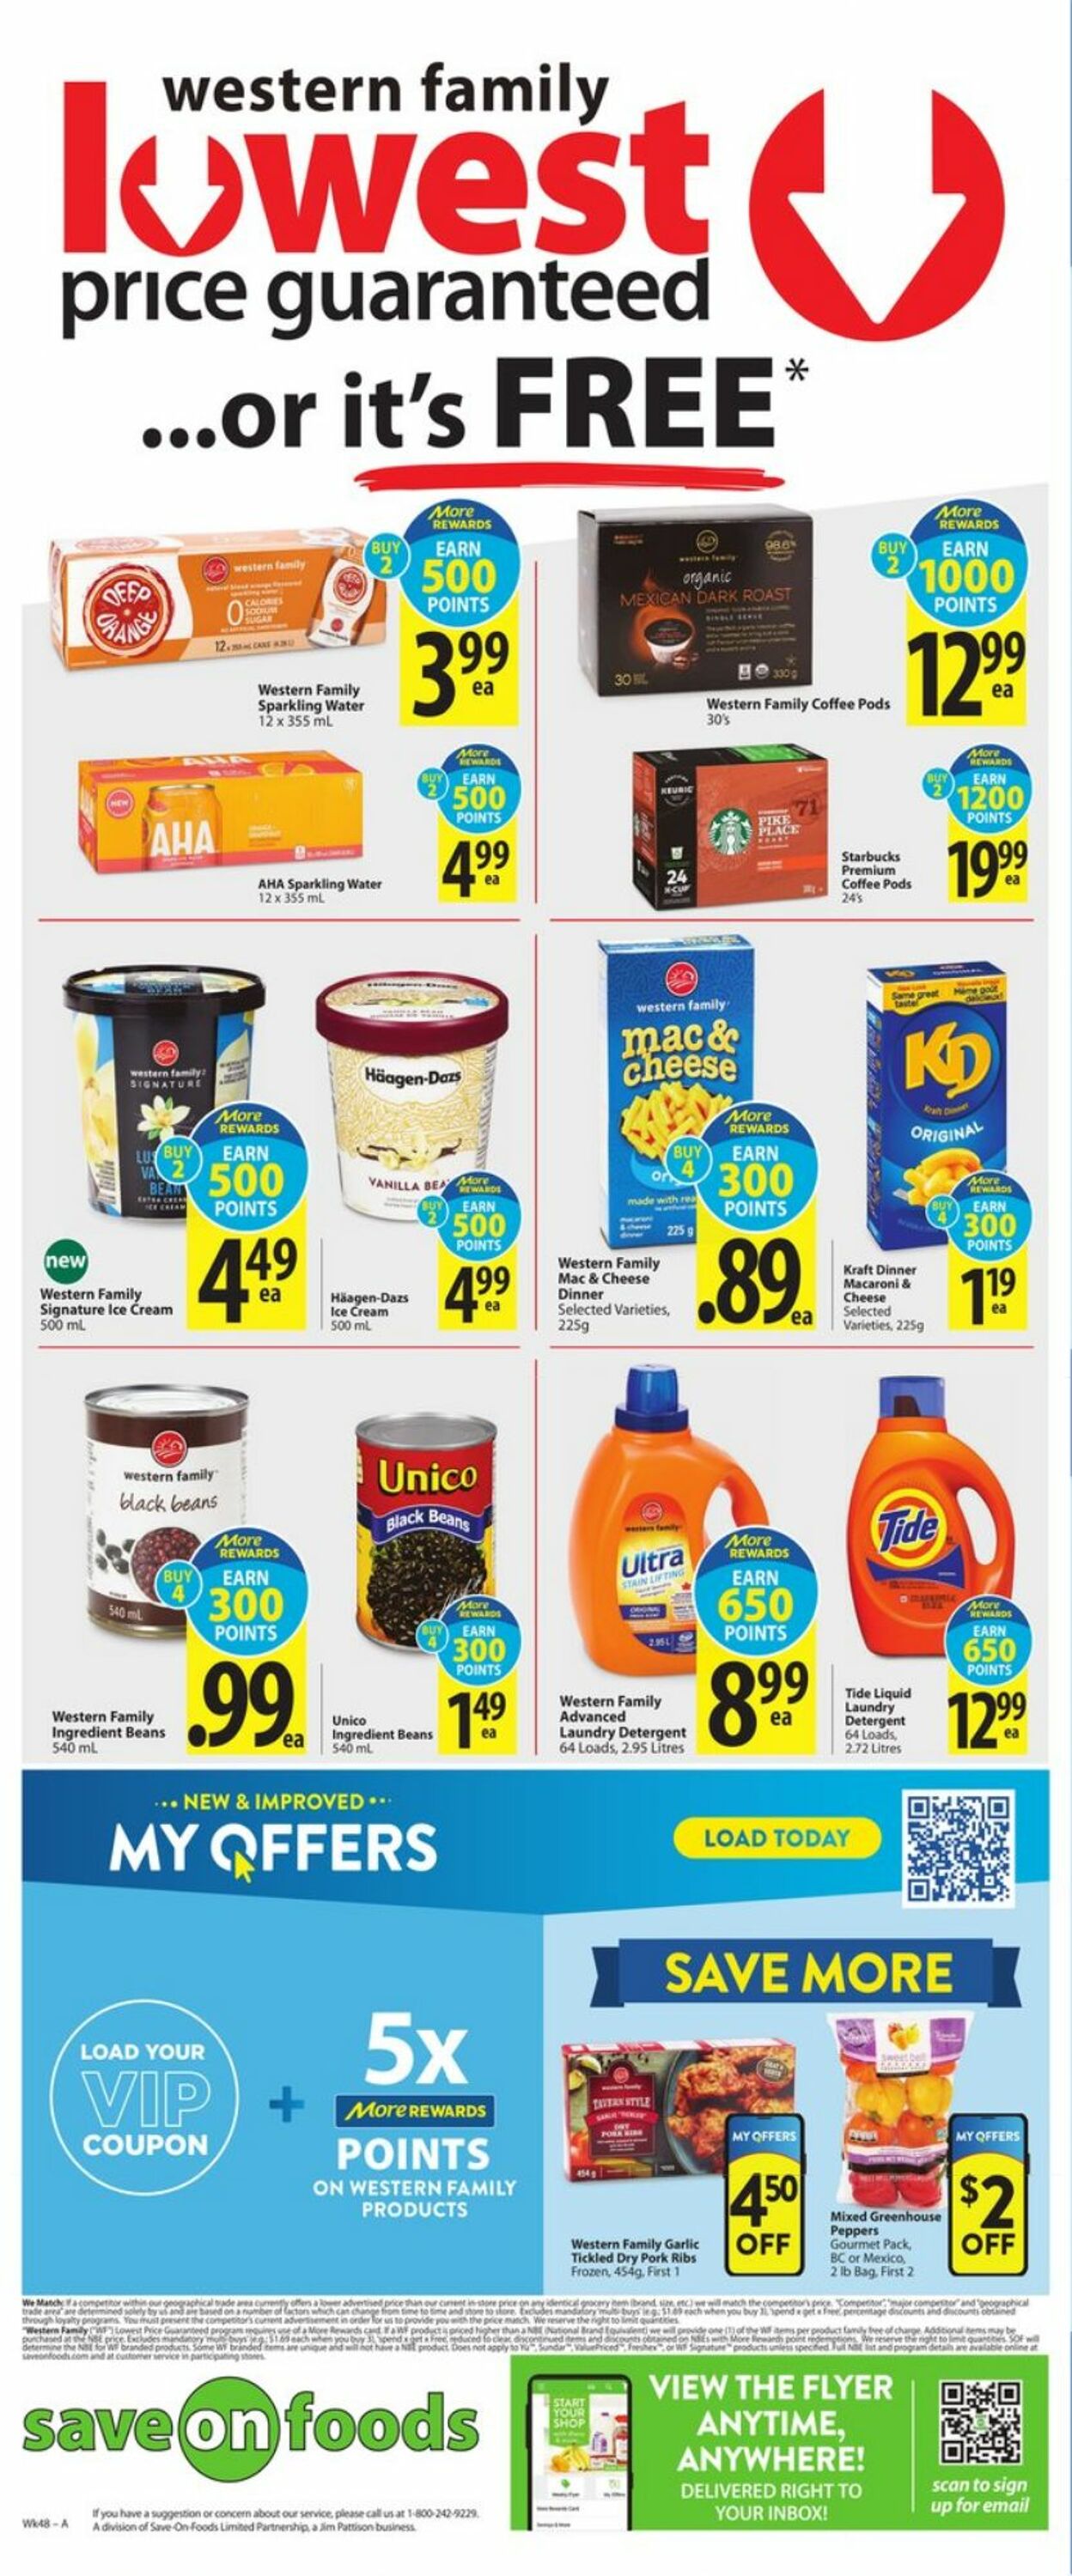 Flyer Save-On-Foods 25.11.2021 - 01.12.2021